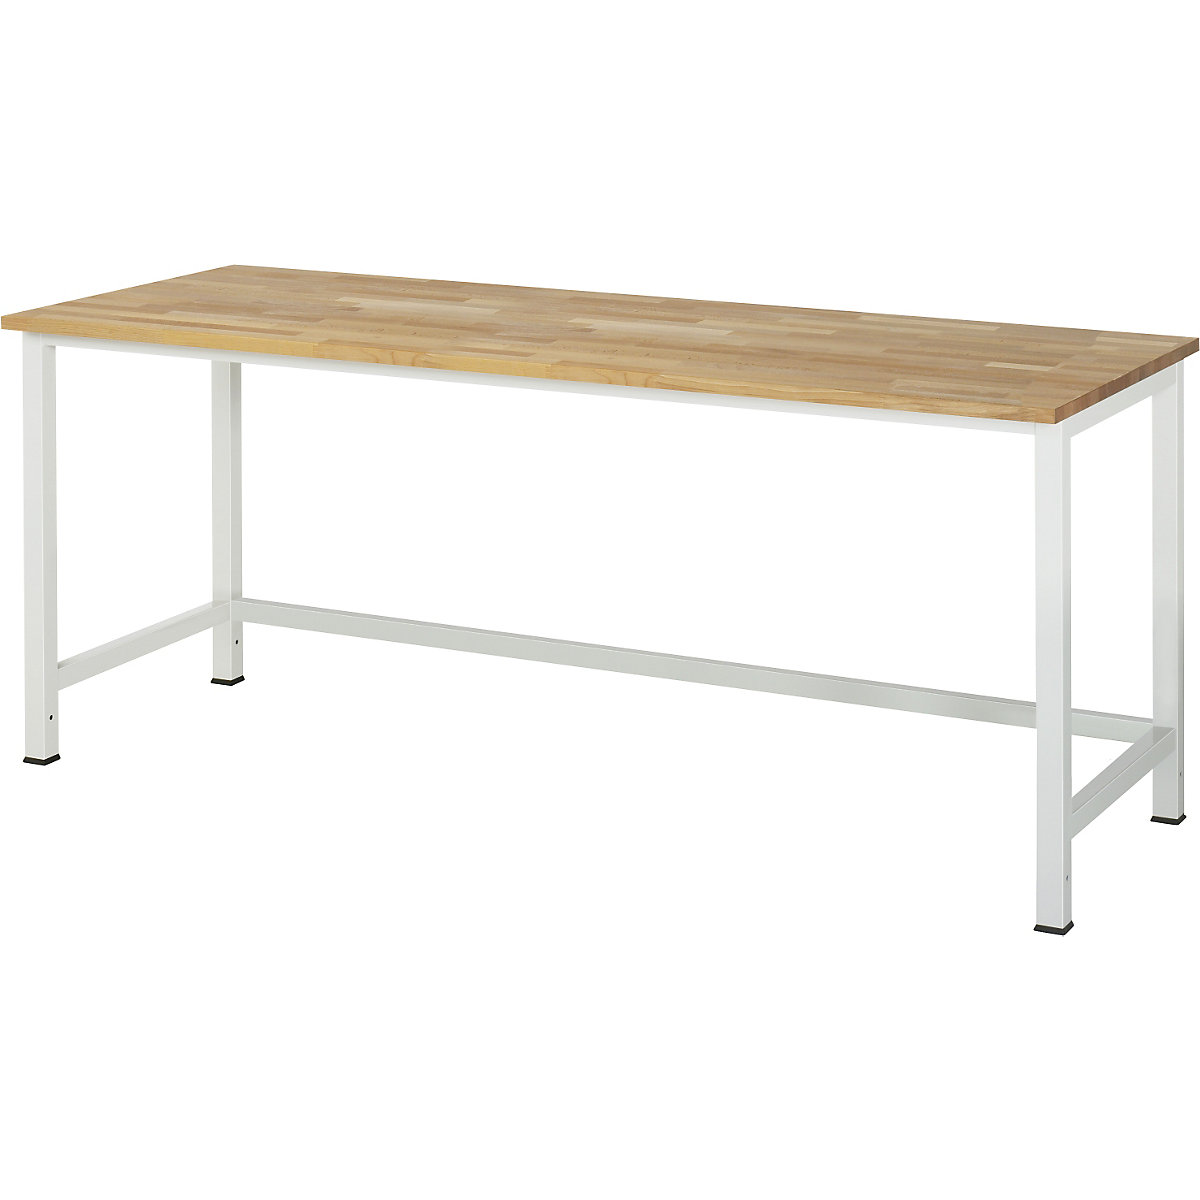 Work table for Series 900 workplace system – RAU, solid beech, width 2000 mm-6